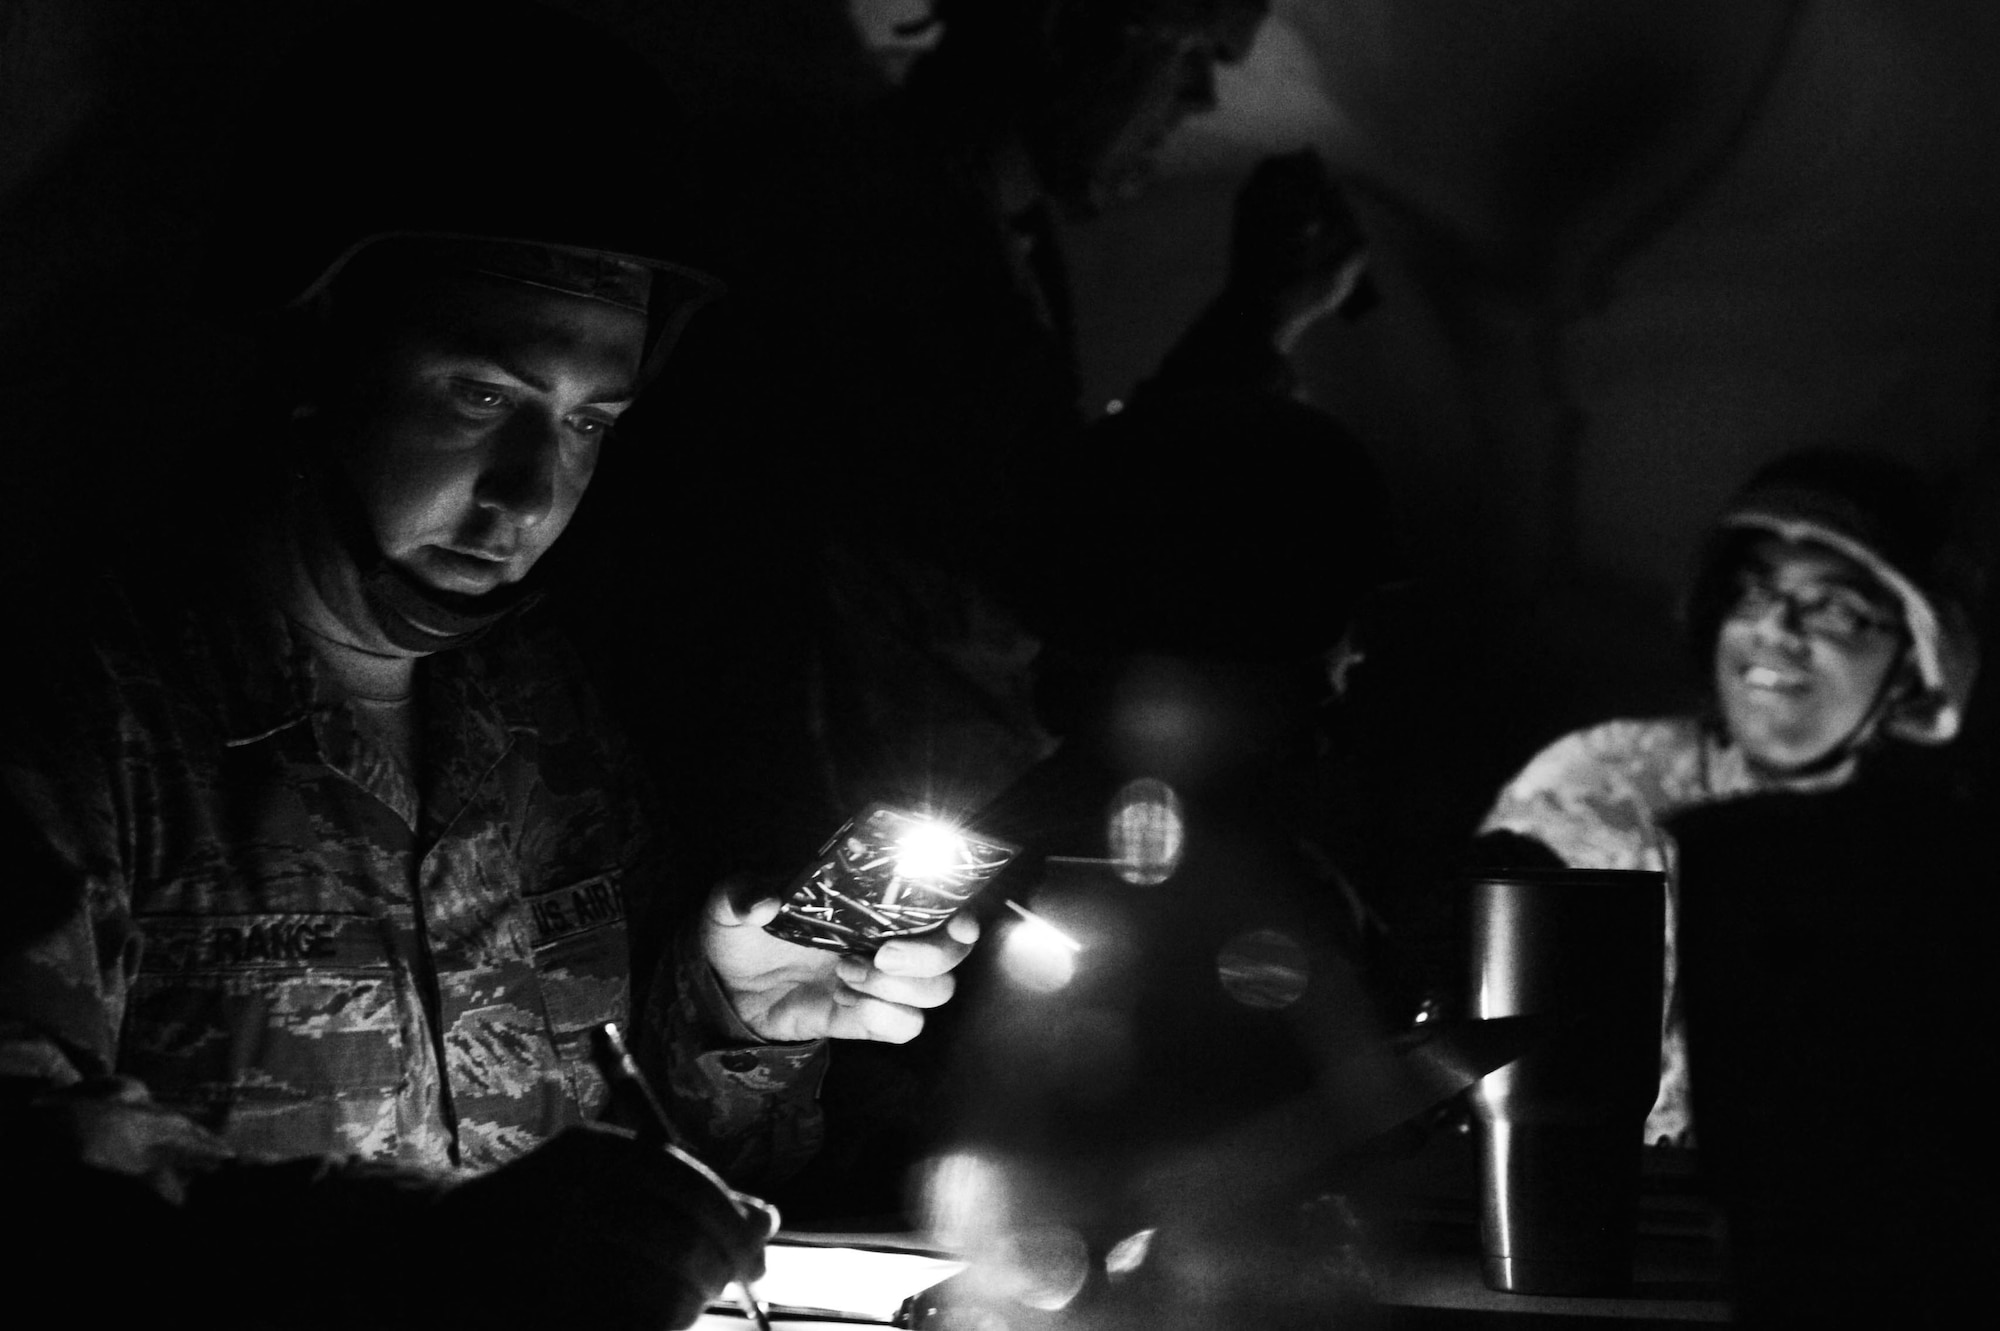 U.S. Air Force Staff Sgt. Matthew Range, 20th Civil Engineer Squadron electrical systems journeyman, uses his phone to shine light on paperwork following a simulated power outage during operational readiness exercise Weasel Victory 17-07 at Poinsett Electronic Combat Range near Wedgefield, S.C., May 16, 2017. Airmen were required to adapt to changing condition in order to complete the mission. (U.S. Air Force photo by Airman 1st Class Christopher Maldonado)